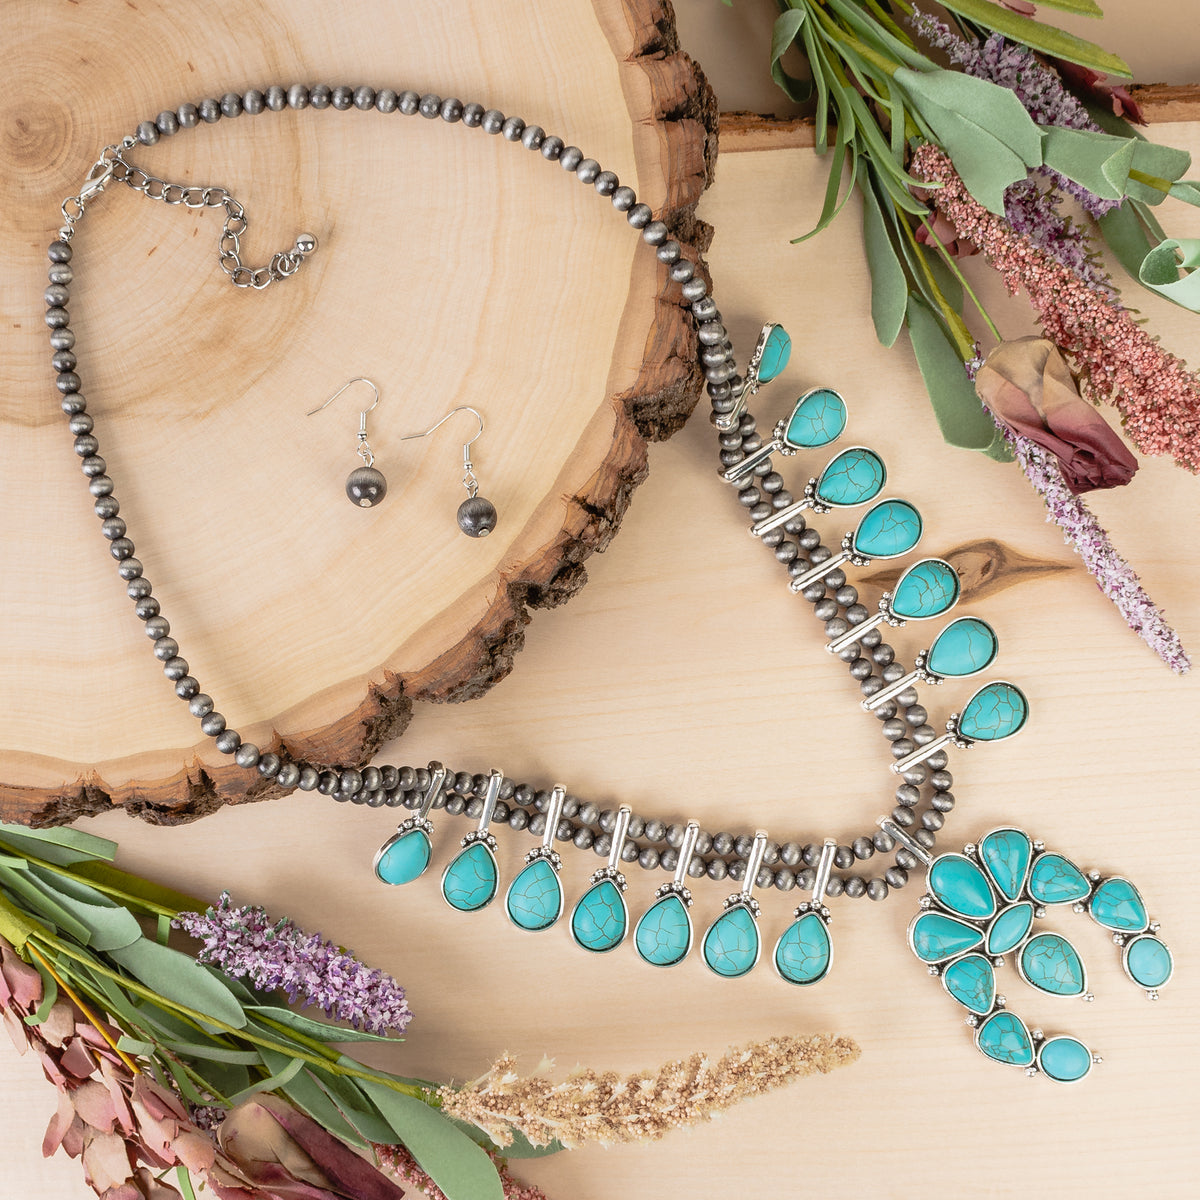 72944 - Squash Blossom Necklace - Turquoise & Silver